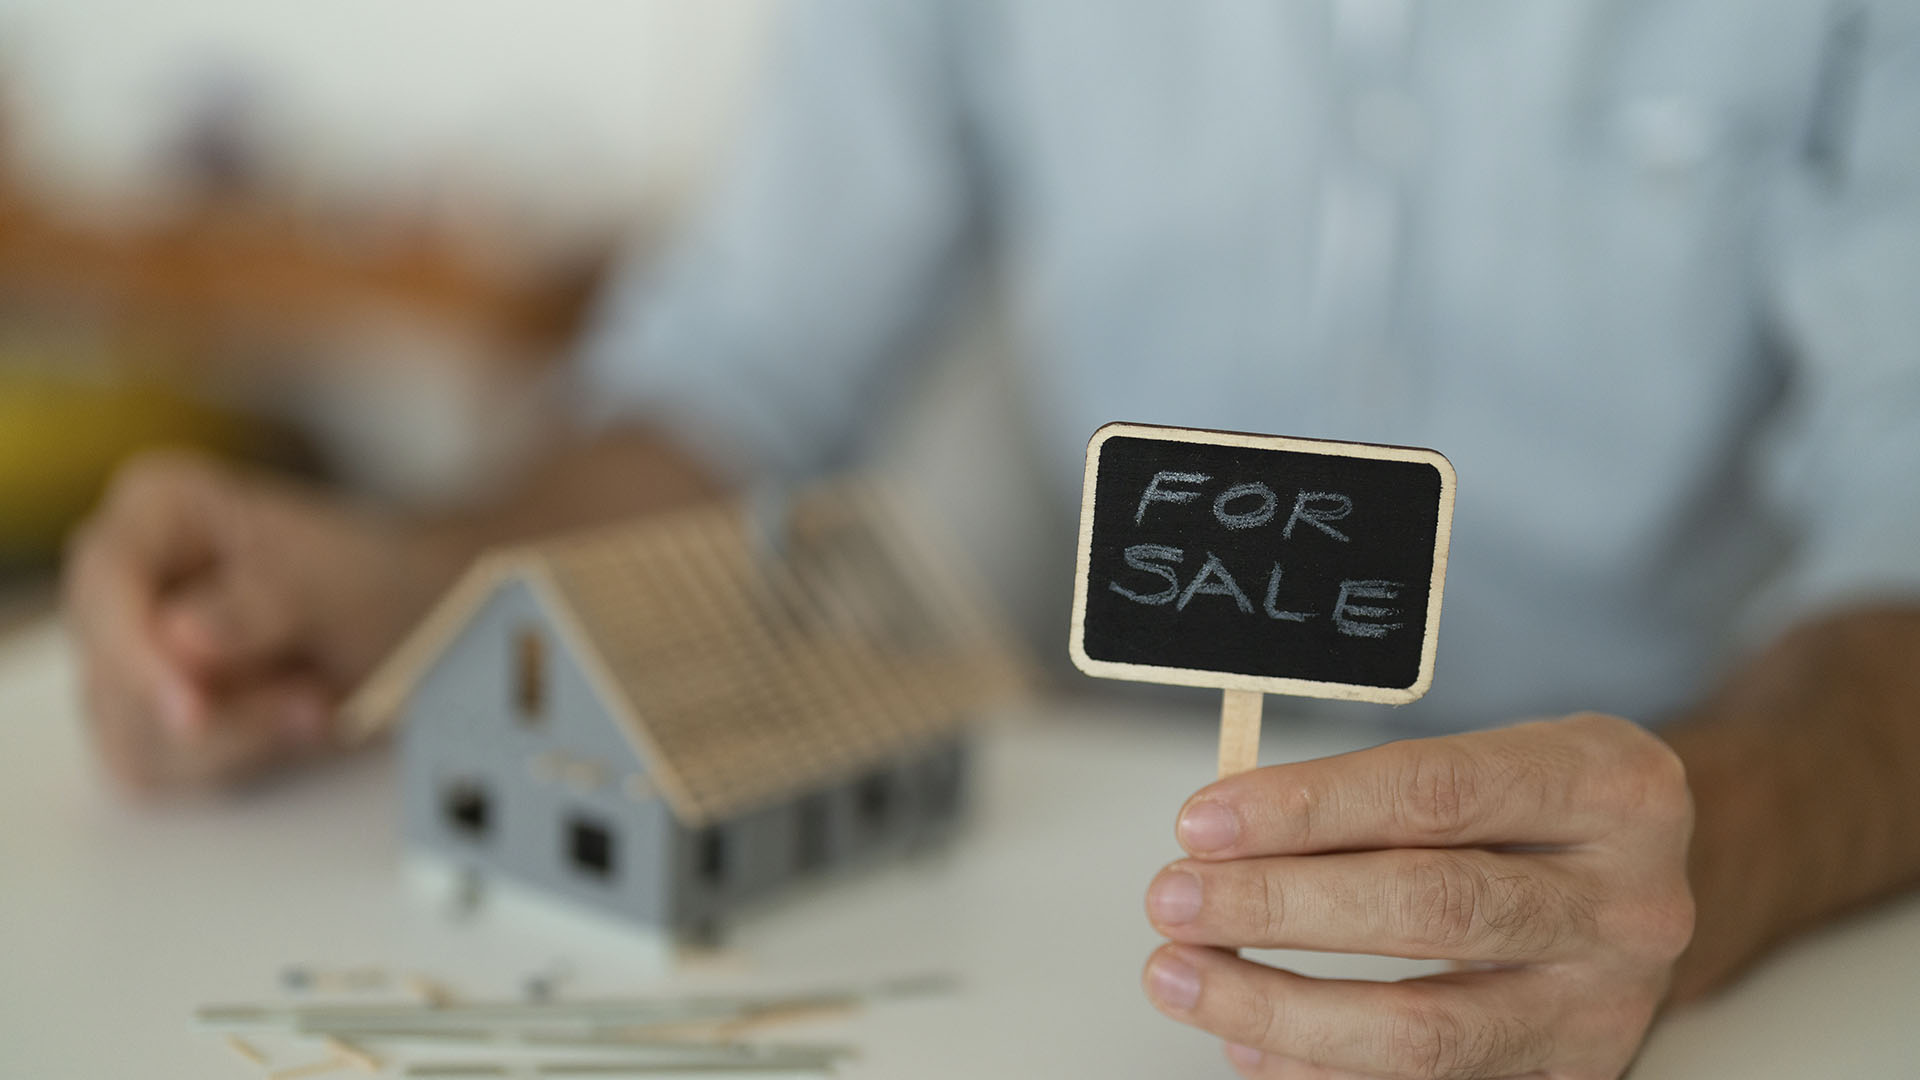 A person holds a small chalkboard sign that reads "For Sale" next to a miniature house model on a table. Is renting ruining your future? This could be the perfect opportunity for you.